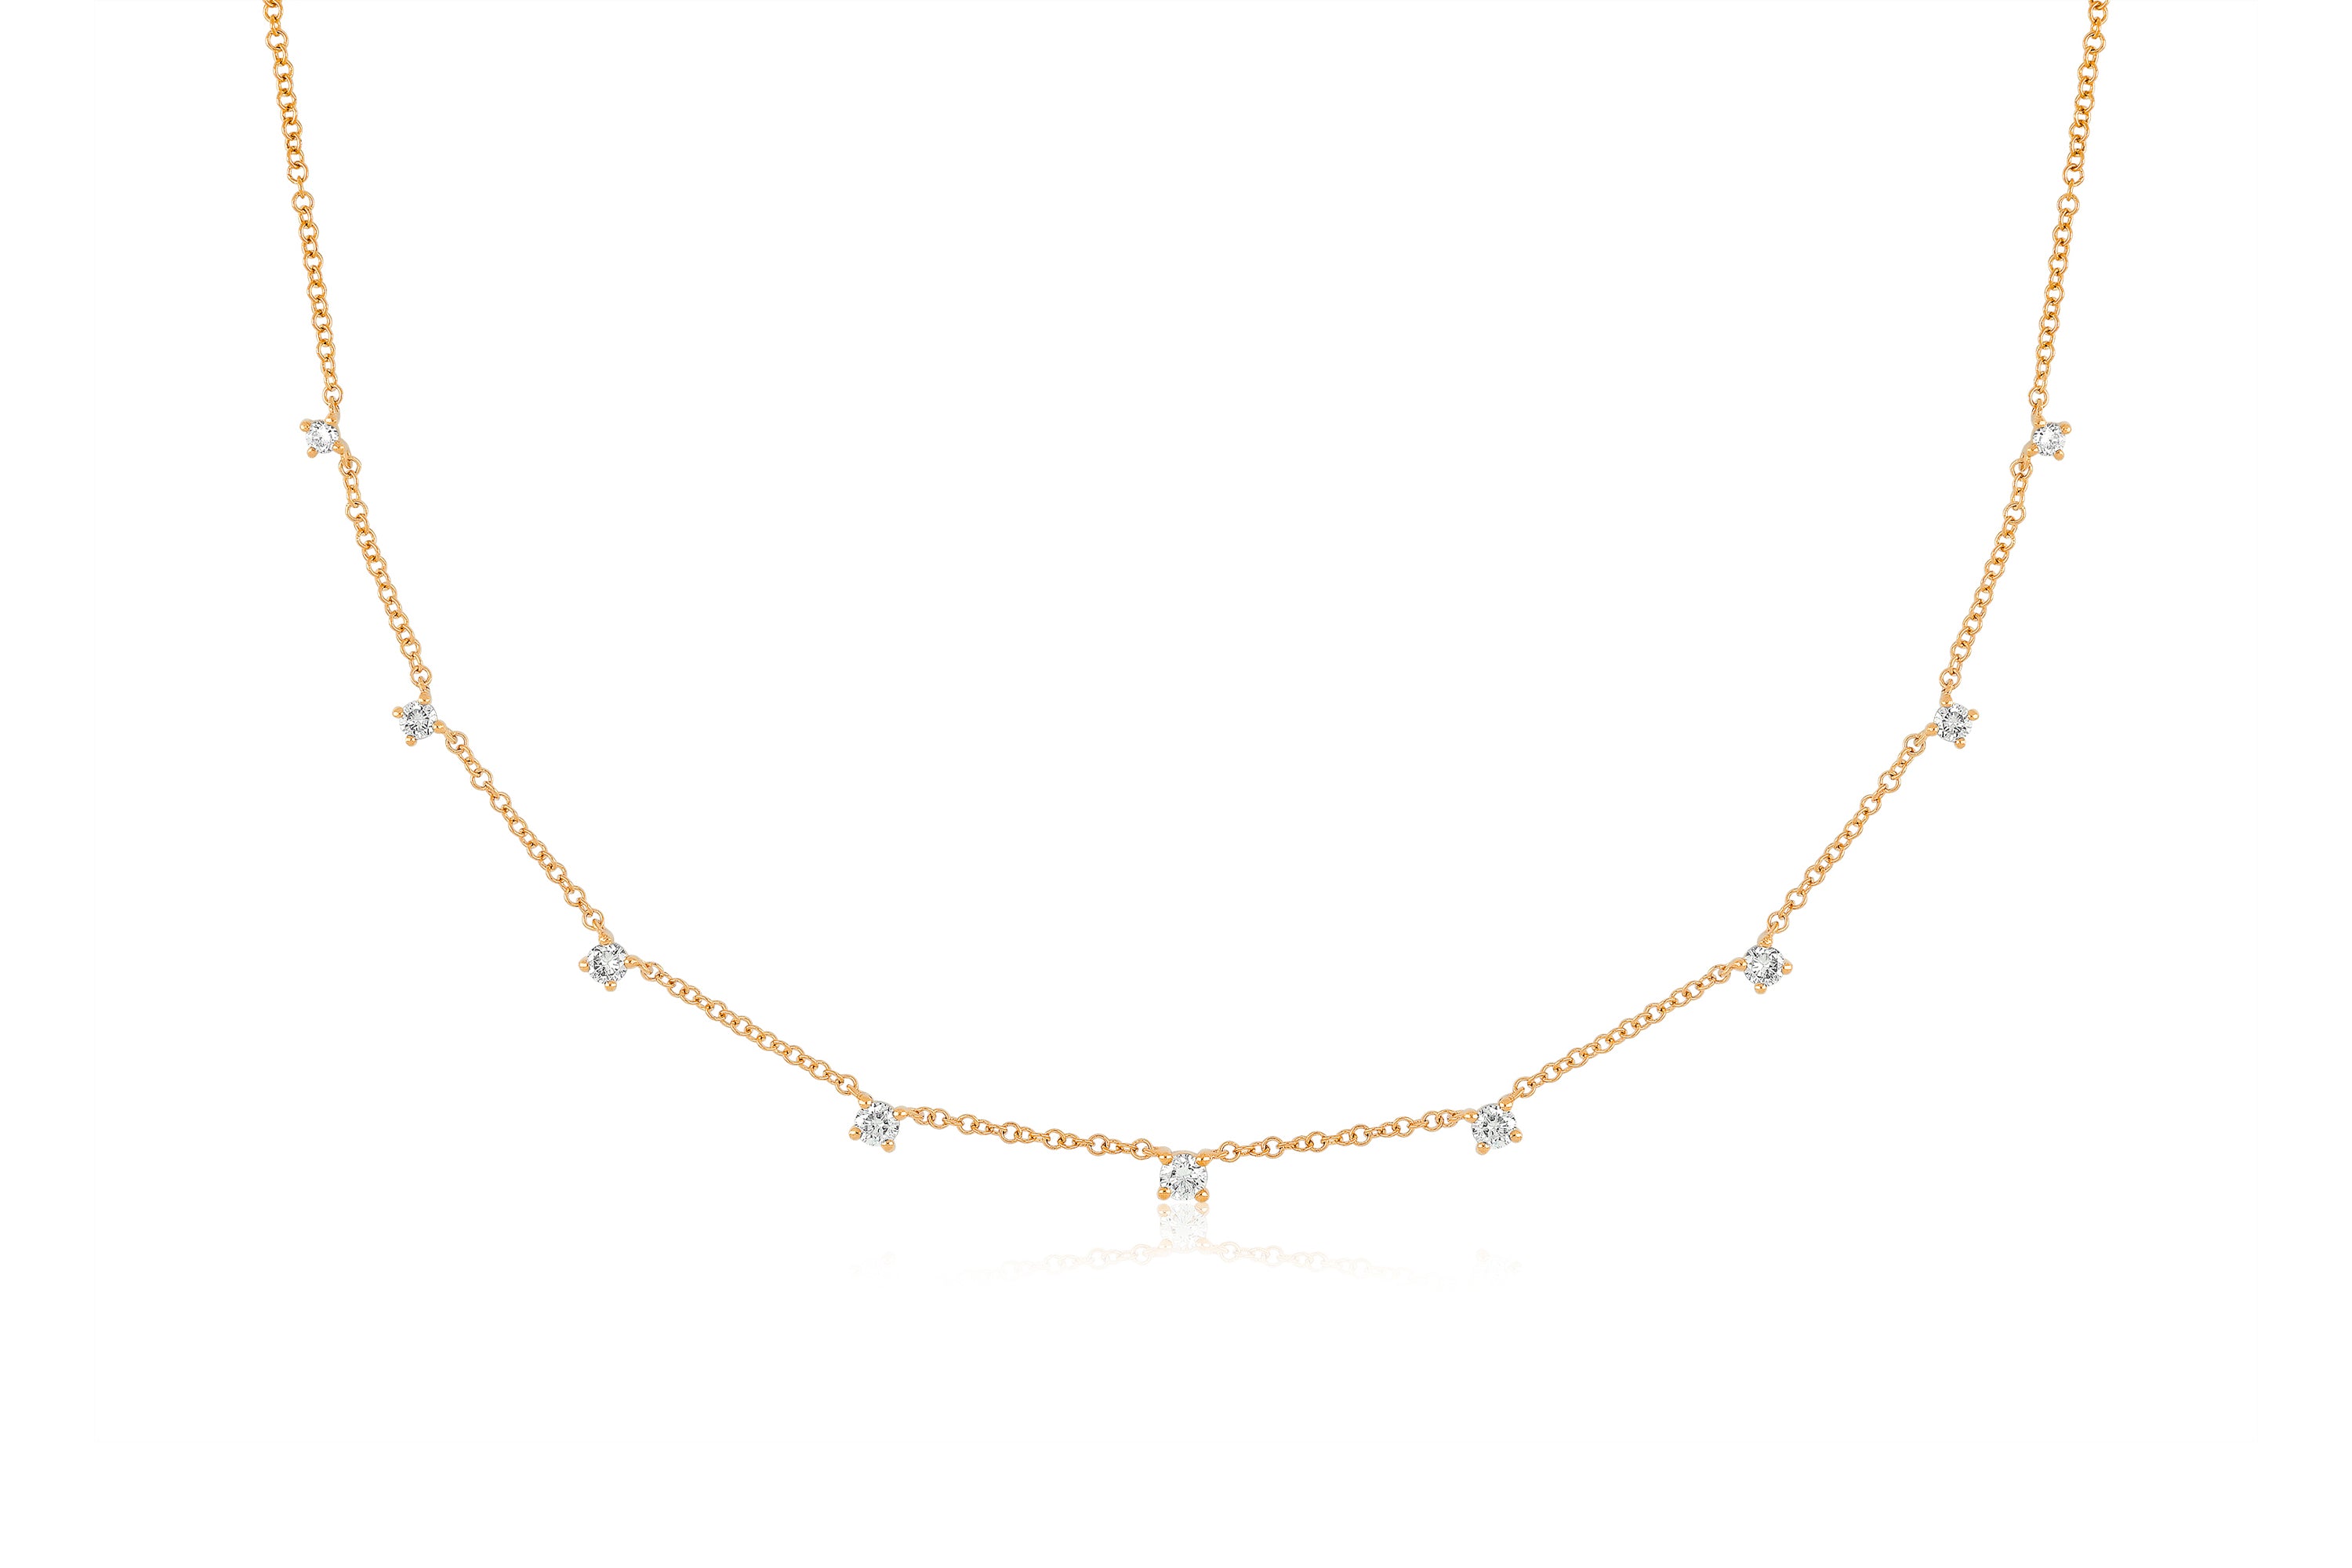 9 Prong Set Diamond Necklace in 14k rose gold